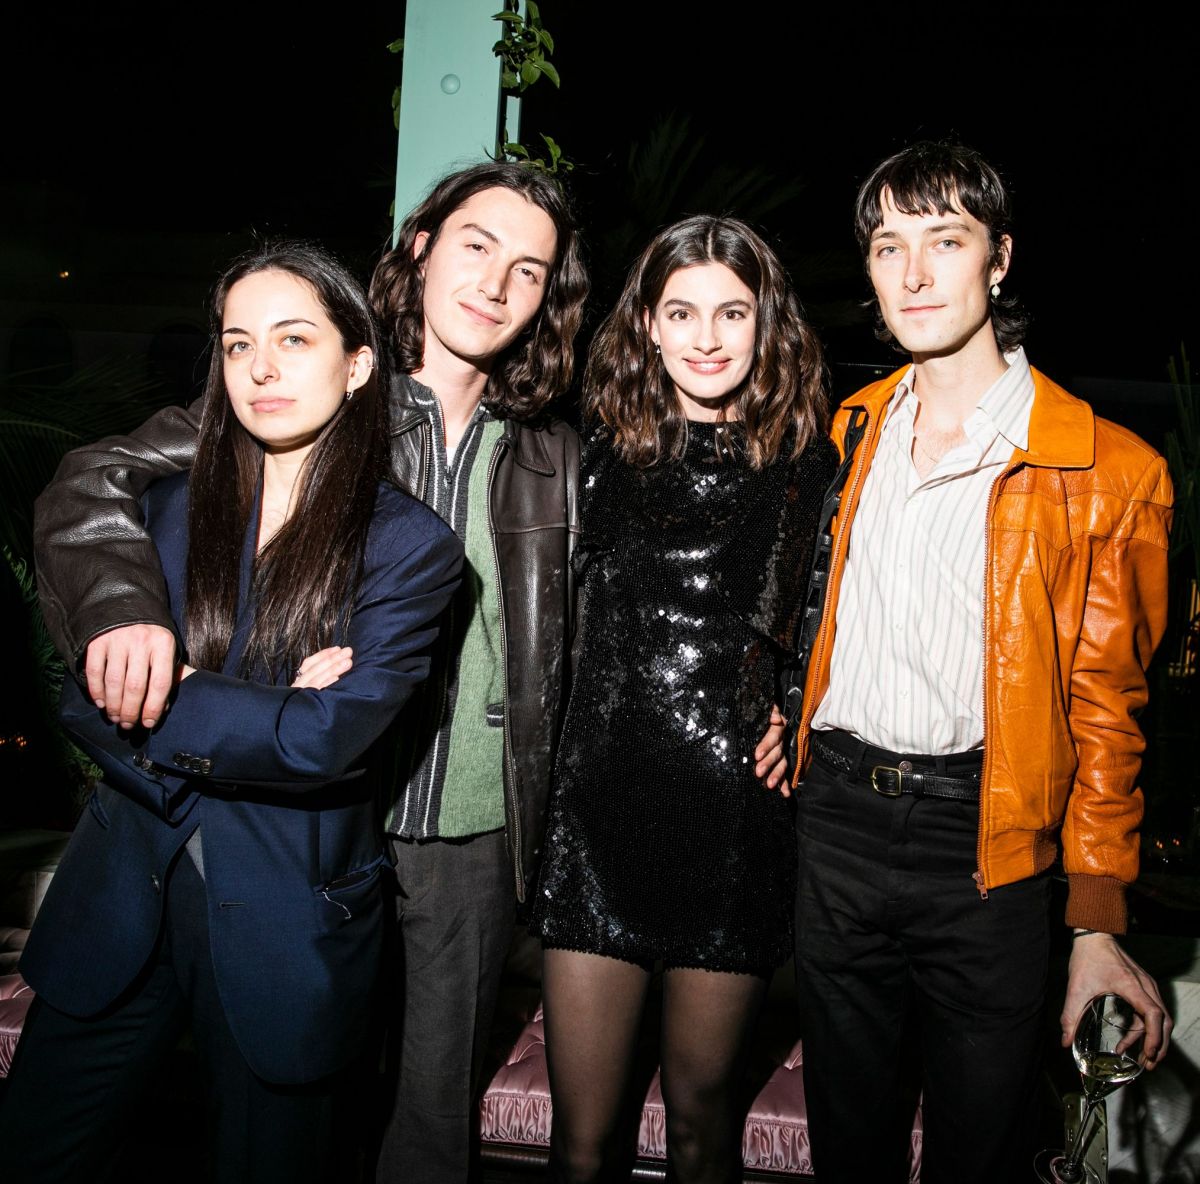 Diana Silvers Gucci And Gq S Superbowl Party Los Angeles